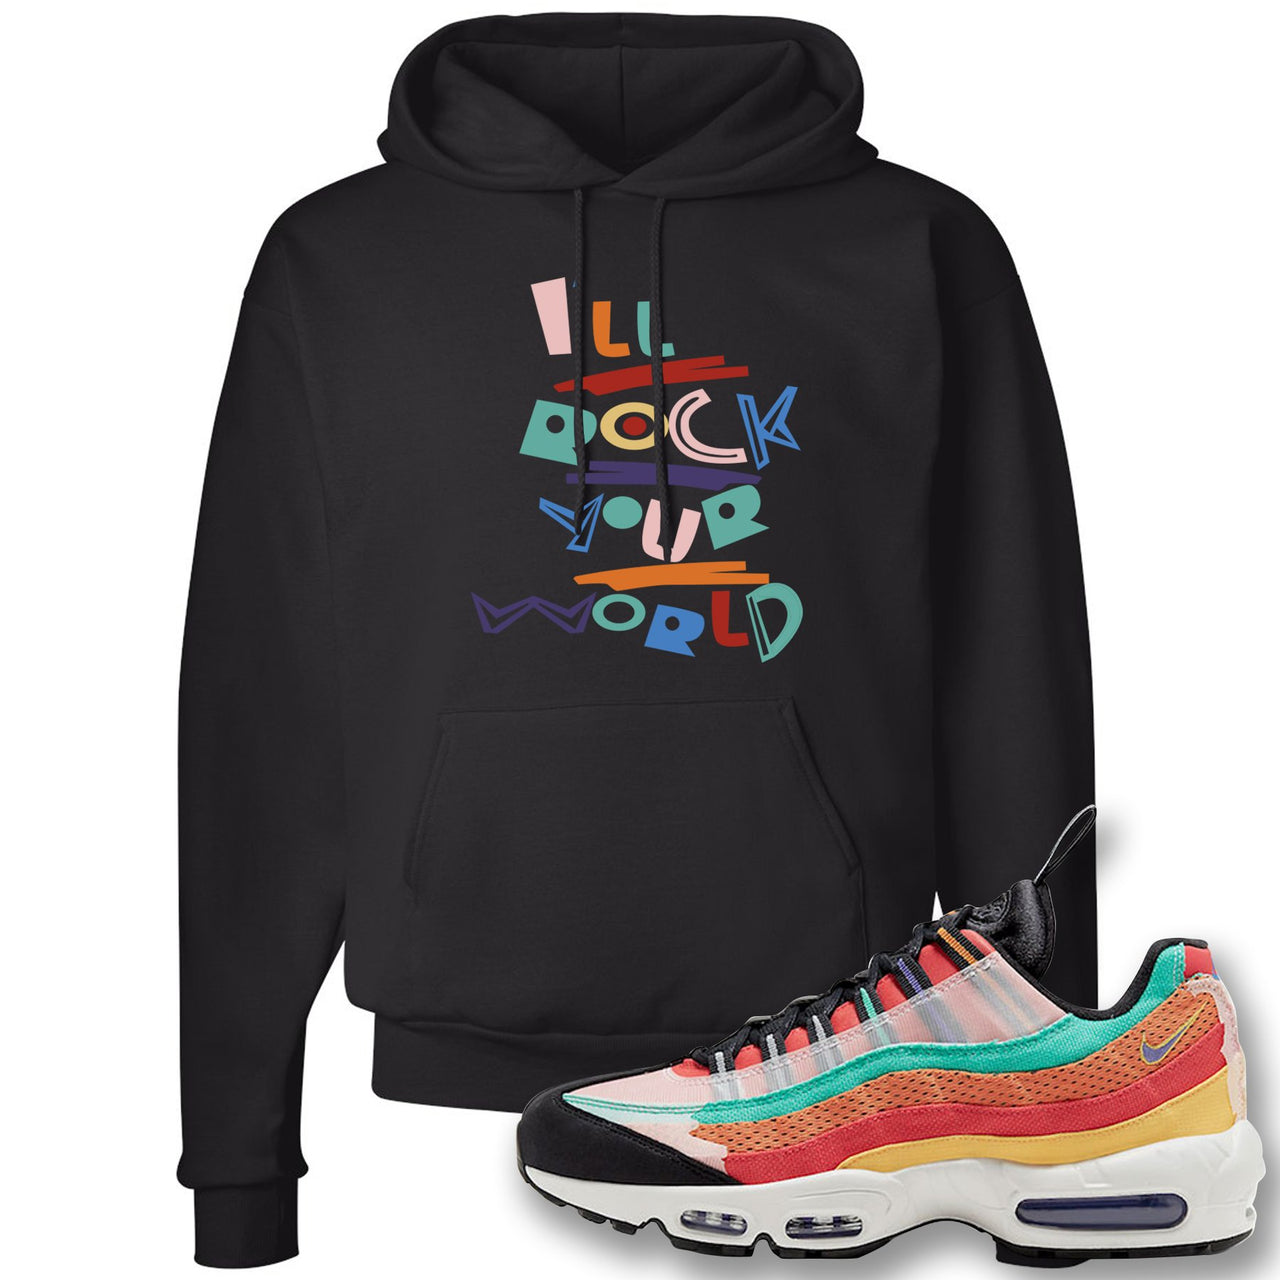 Air Max 95 Black History Month Sneaker Black Pullover Hoodie | Hoodie to match Nike Air Max 95 Black History Month Shoes | I'll Rock Your World